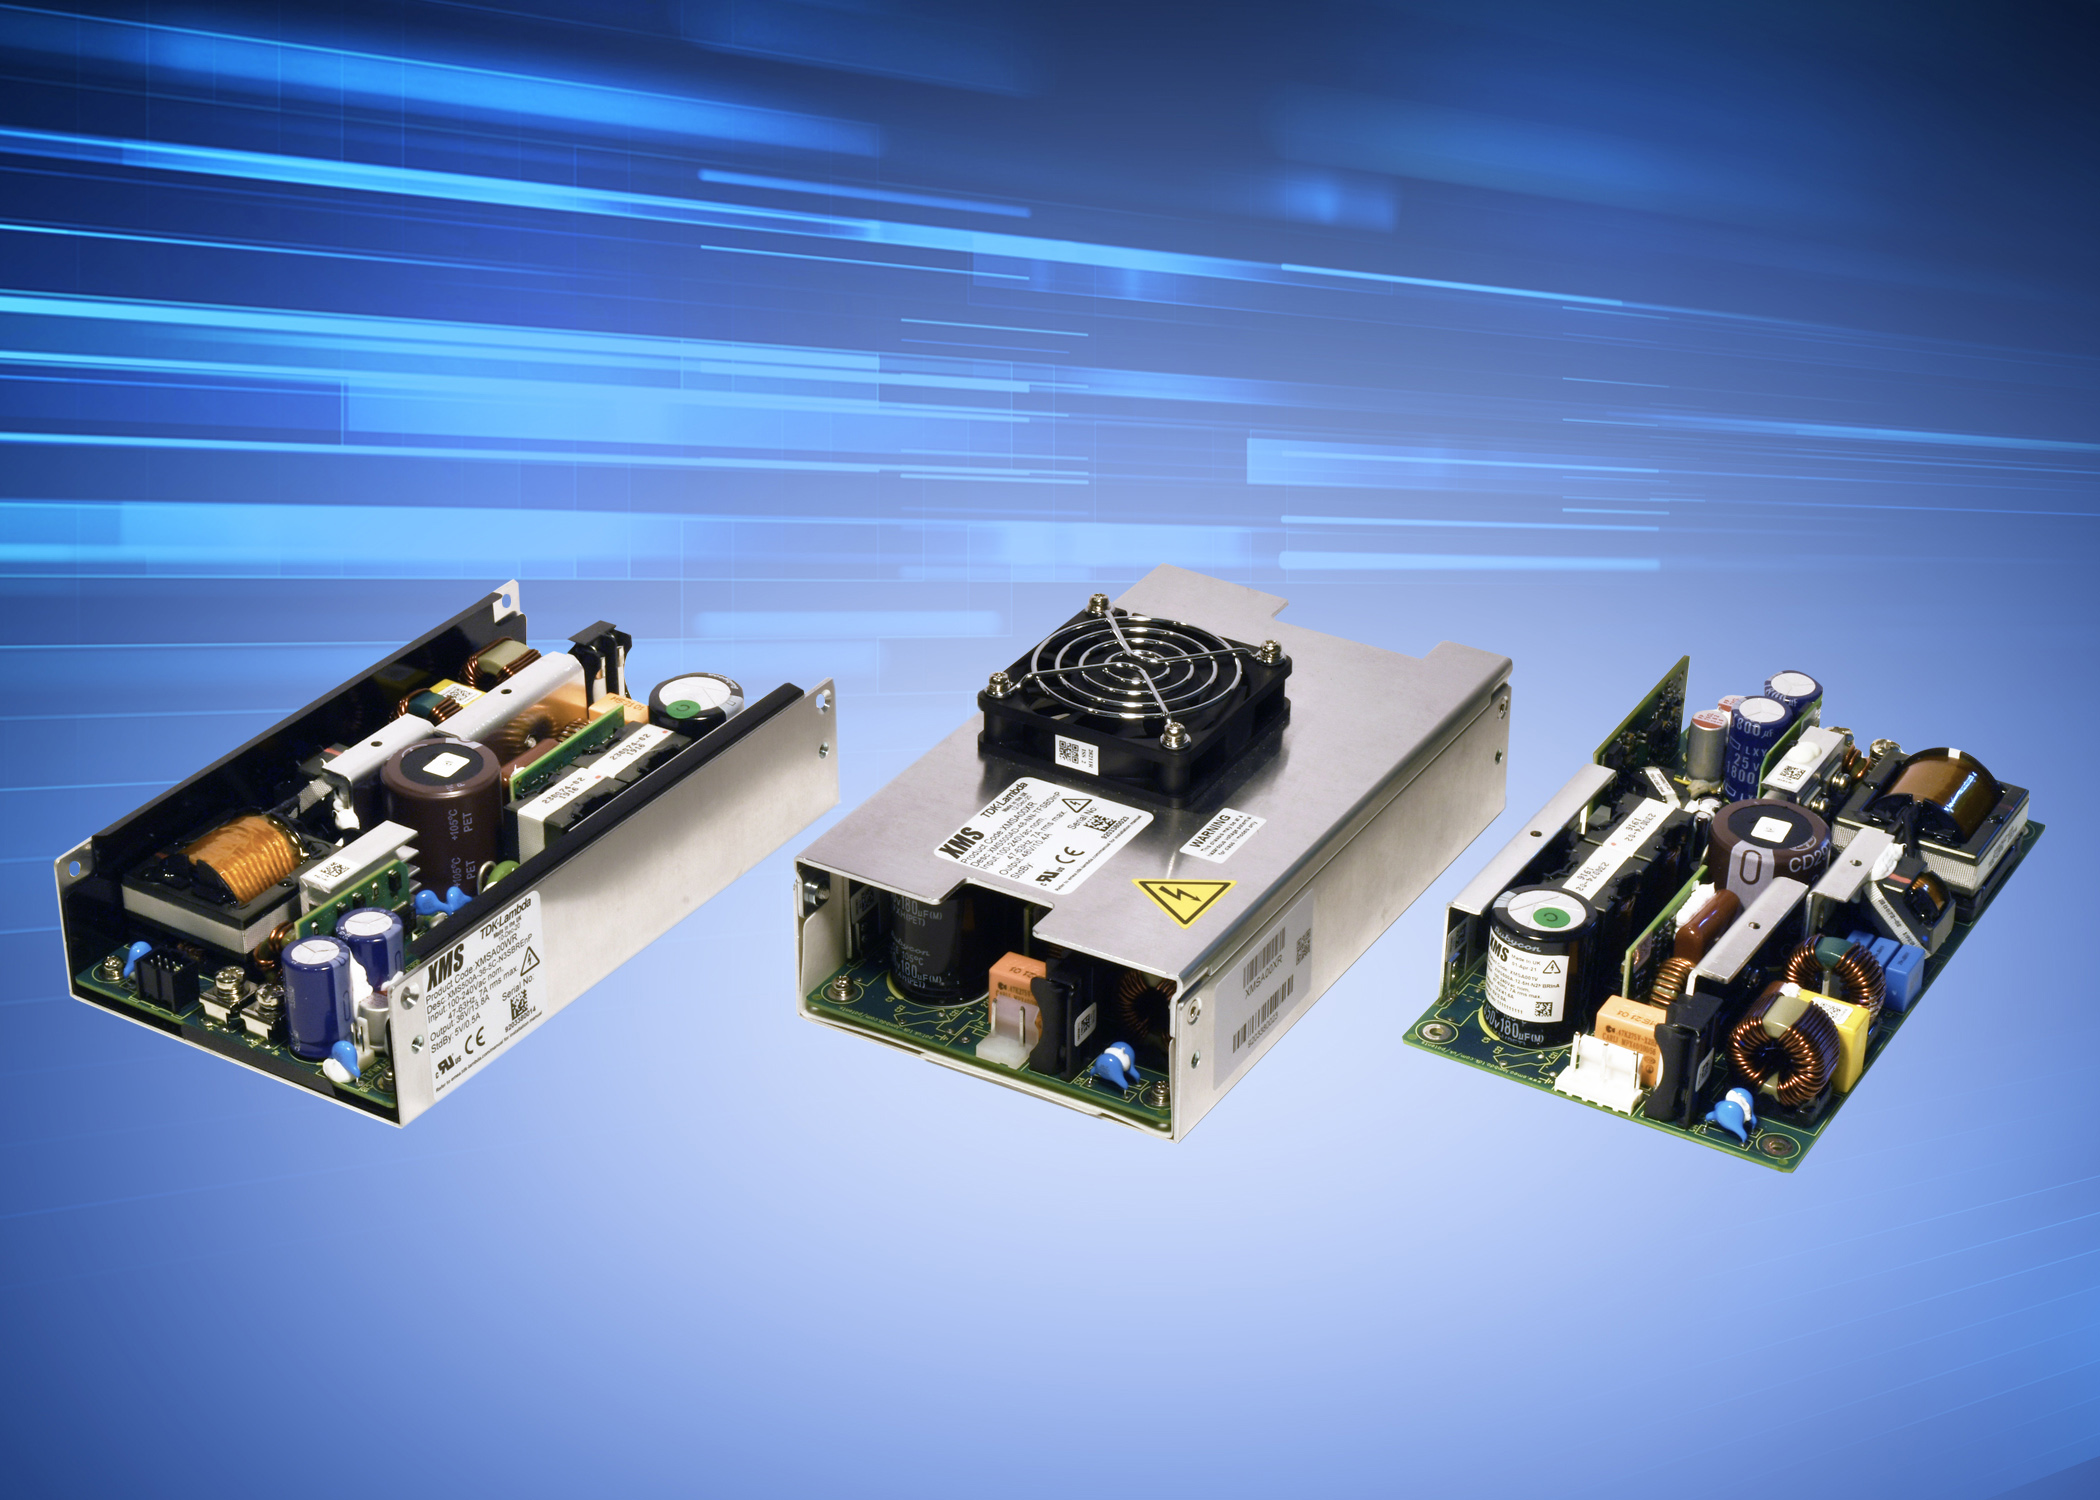 500W Low Airflow Power Supplies Enhanced with new Features